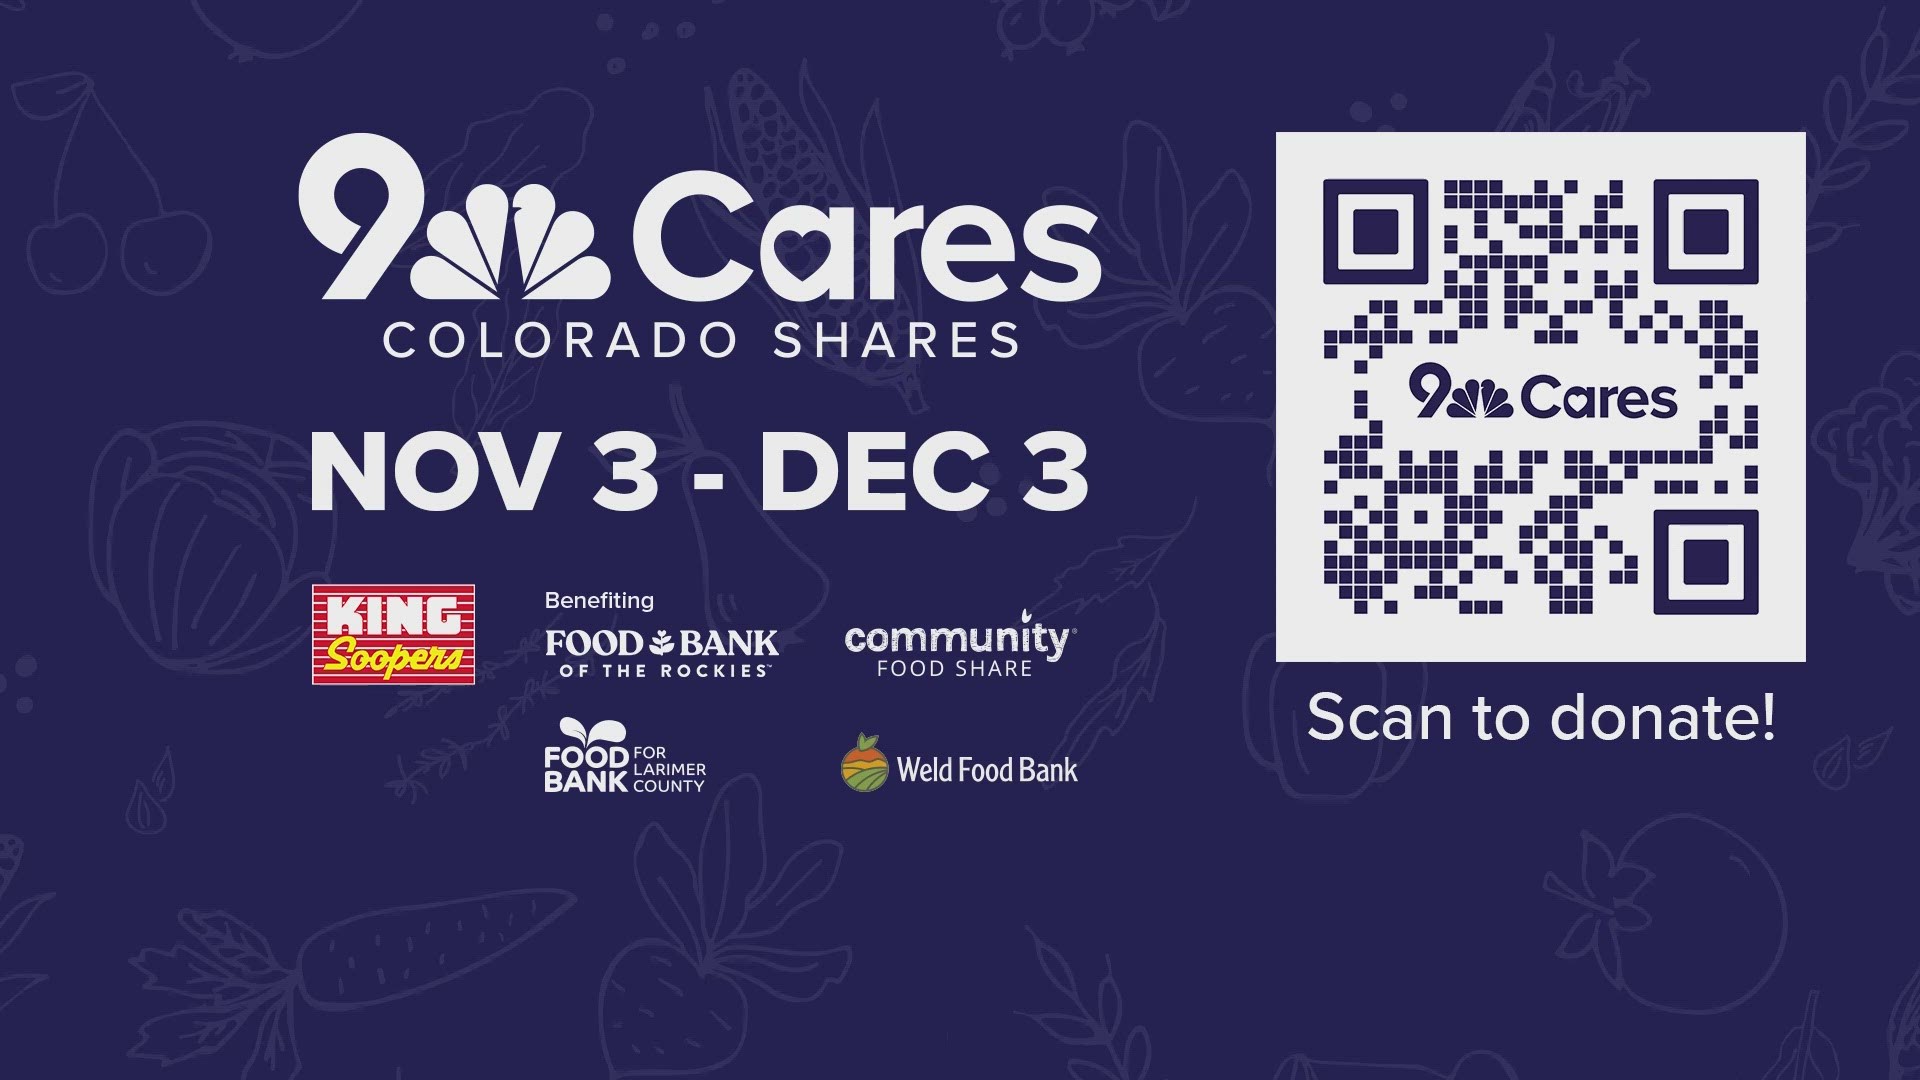 The drive will help support four Colorado food banks: Community Food Share, Food Bank for Larimer County, Food Bank of the Rockies, and Weld Food Bank.